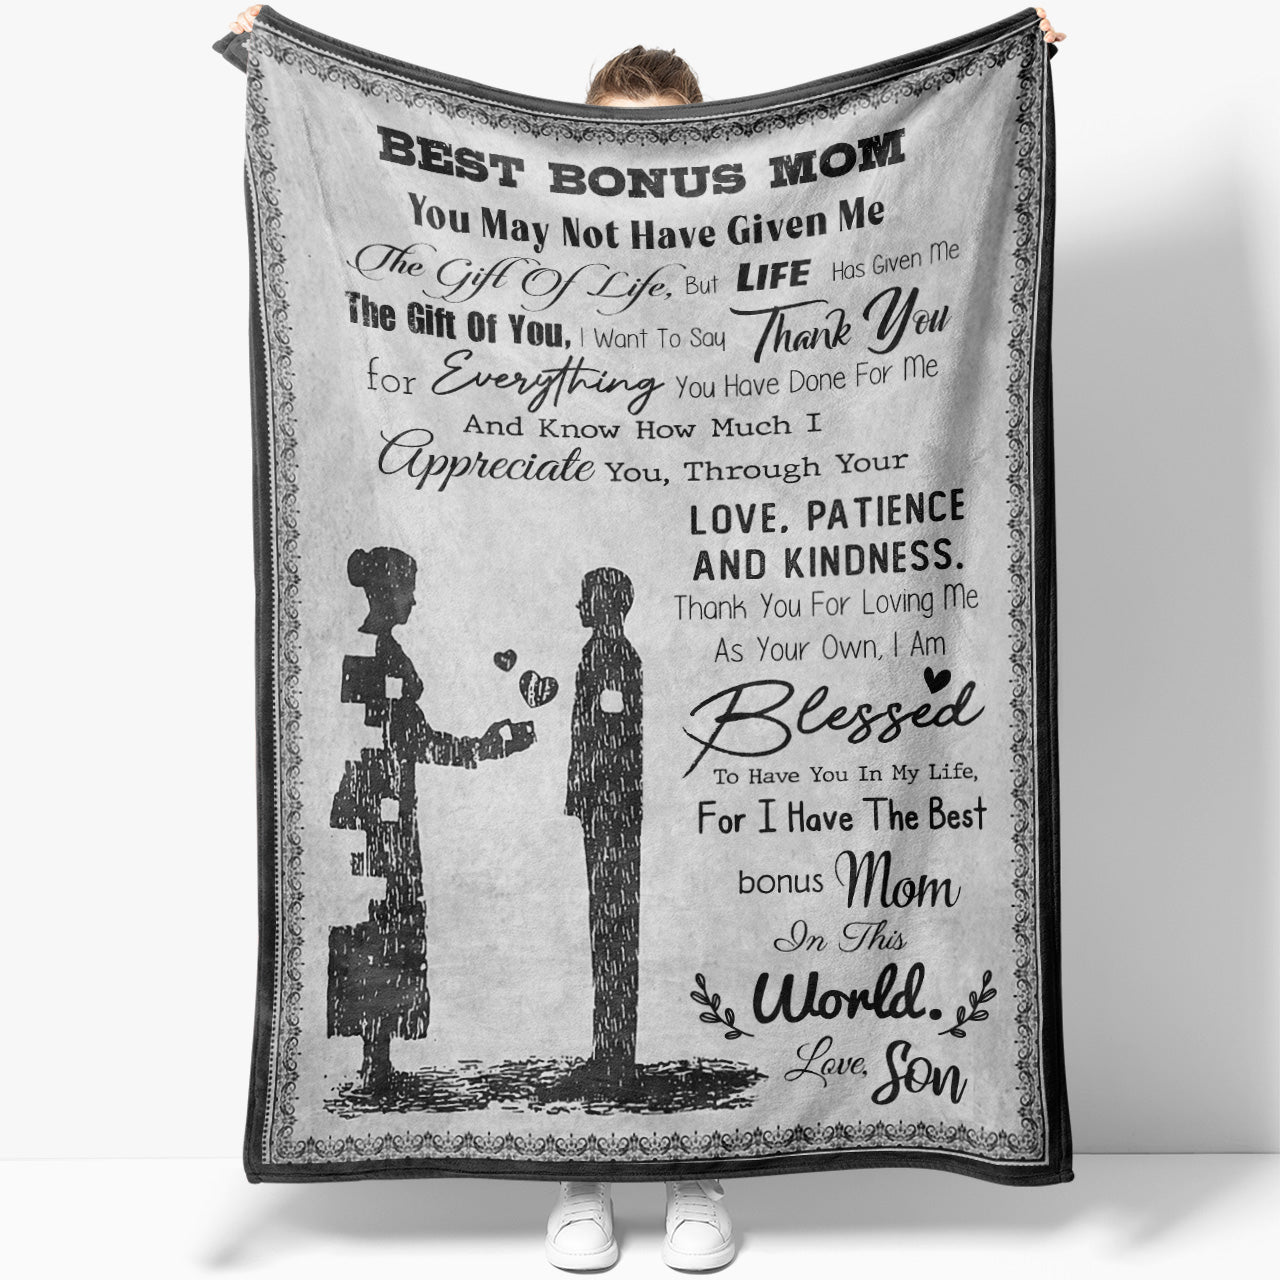 Blanket Gift Ideas For Bonus Mom, Your Love Patience And Kindness Blanket Gift for Step Mom Mothers Day